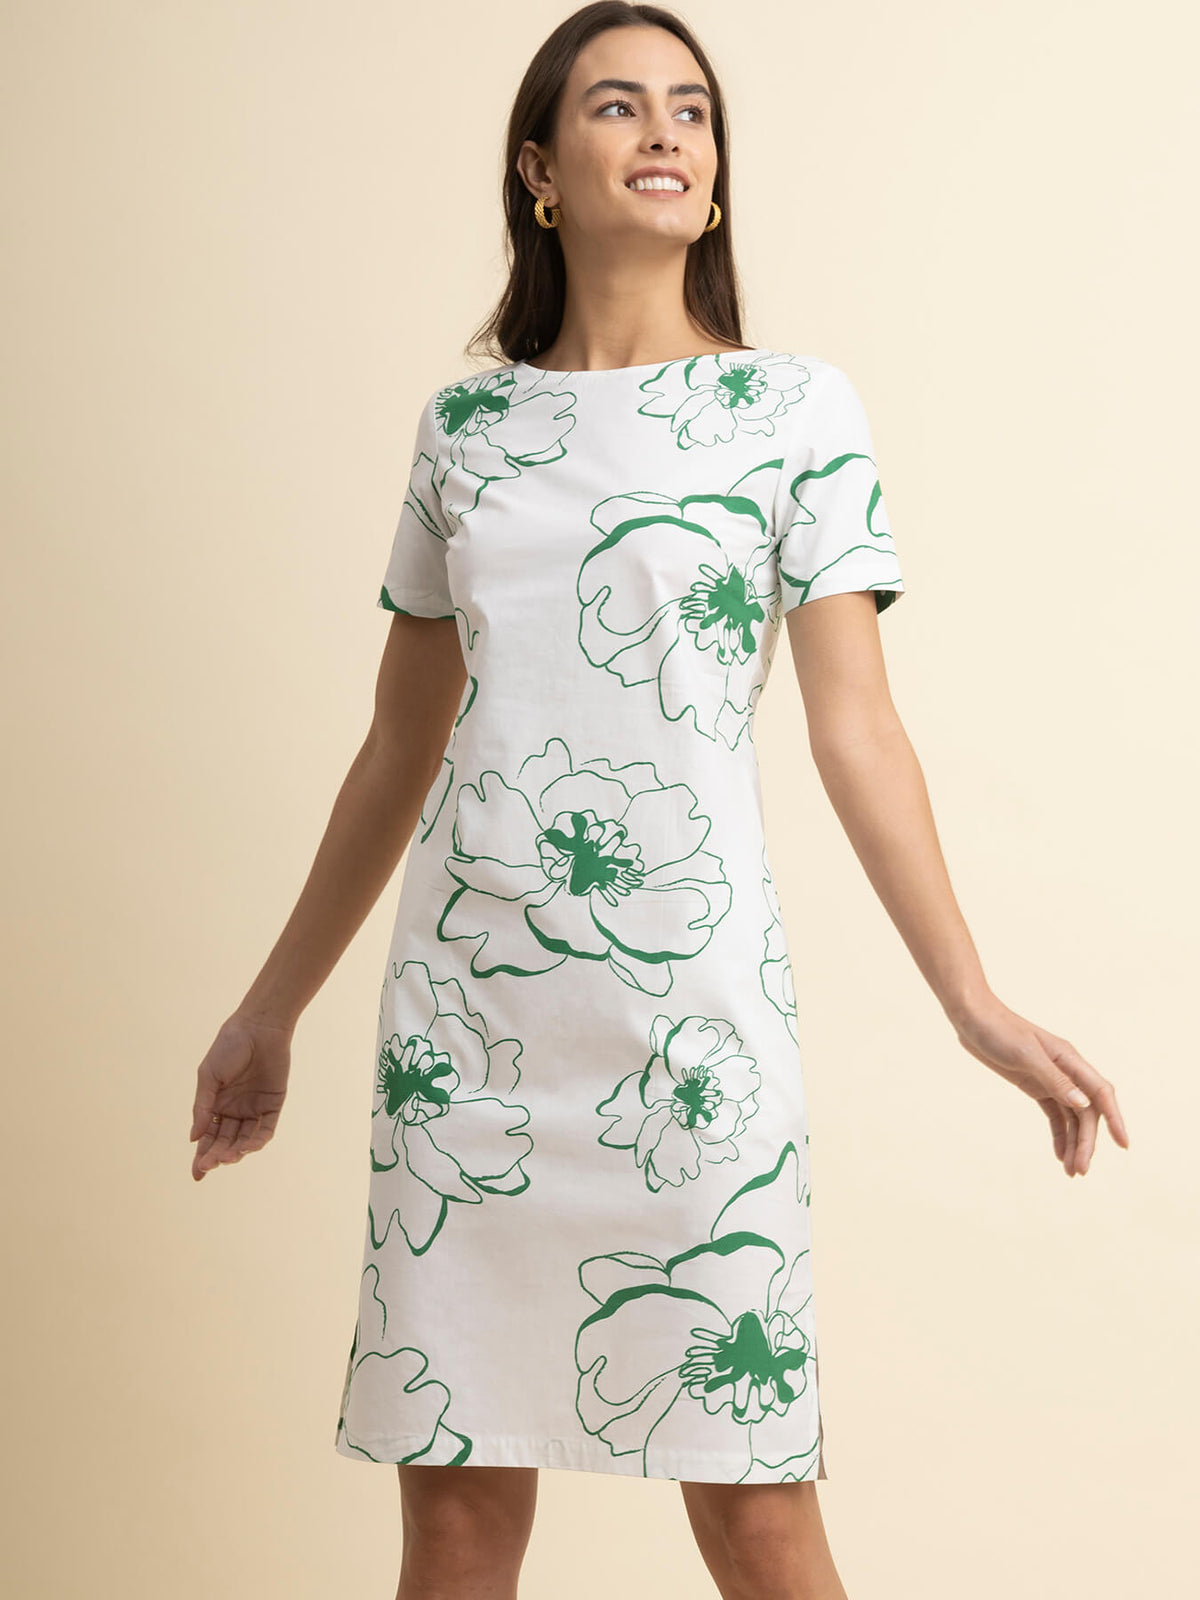 Cotton Boat Neck Dress - White And Green